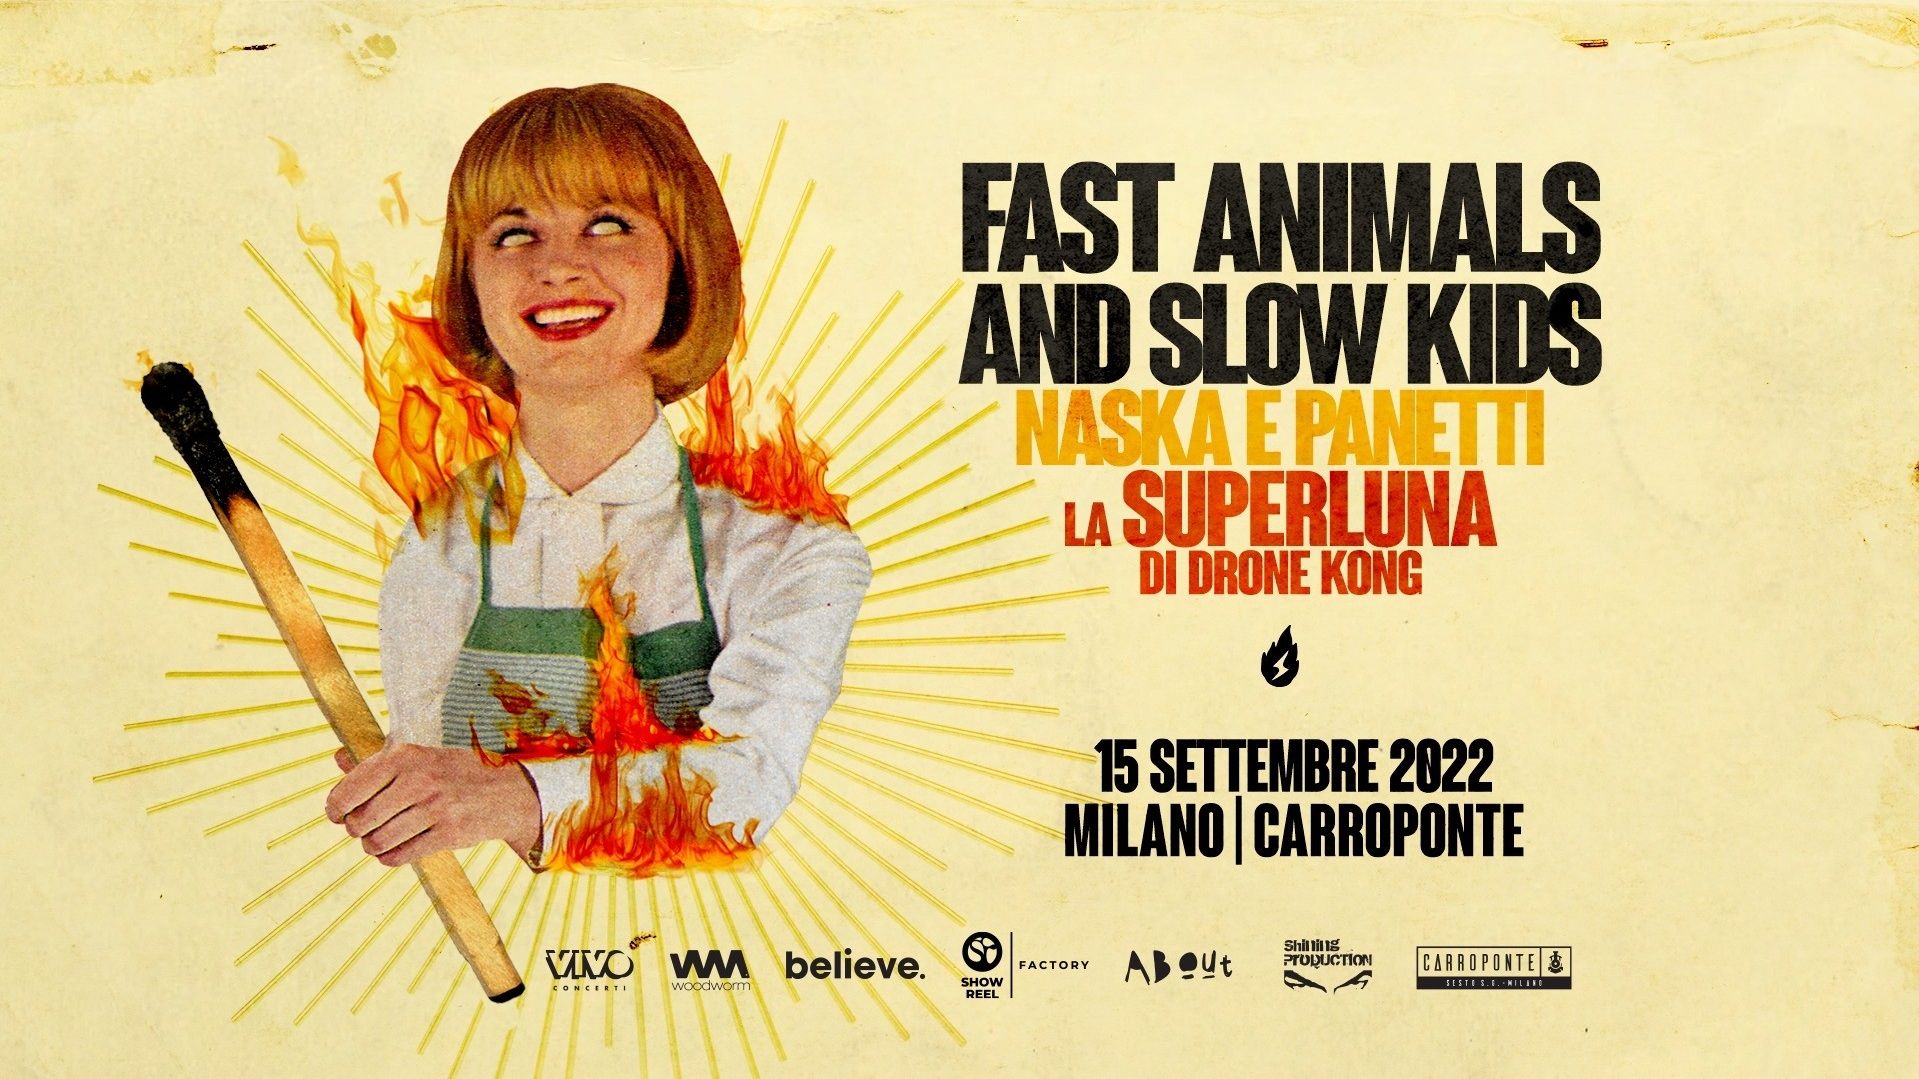 Fast Animals And Slow Kids